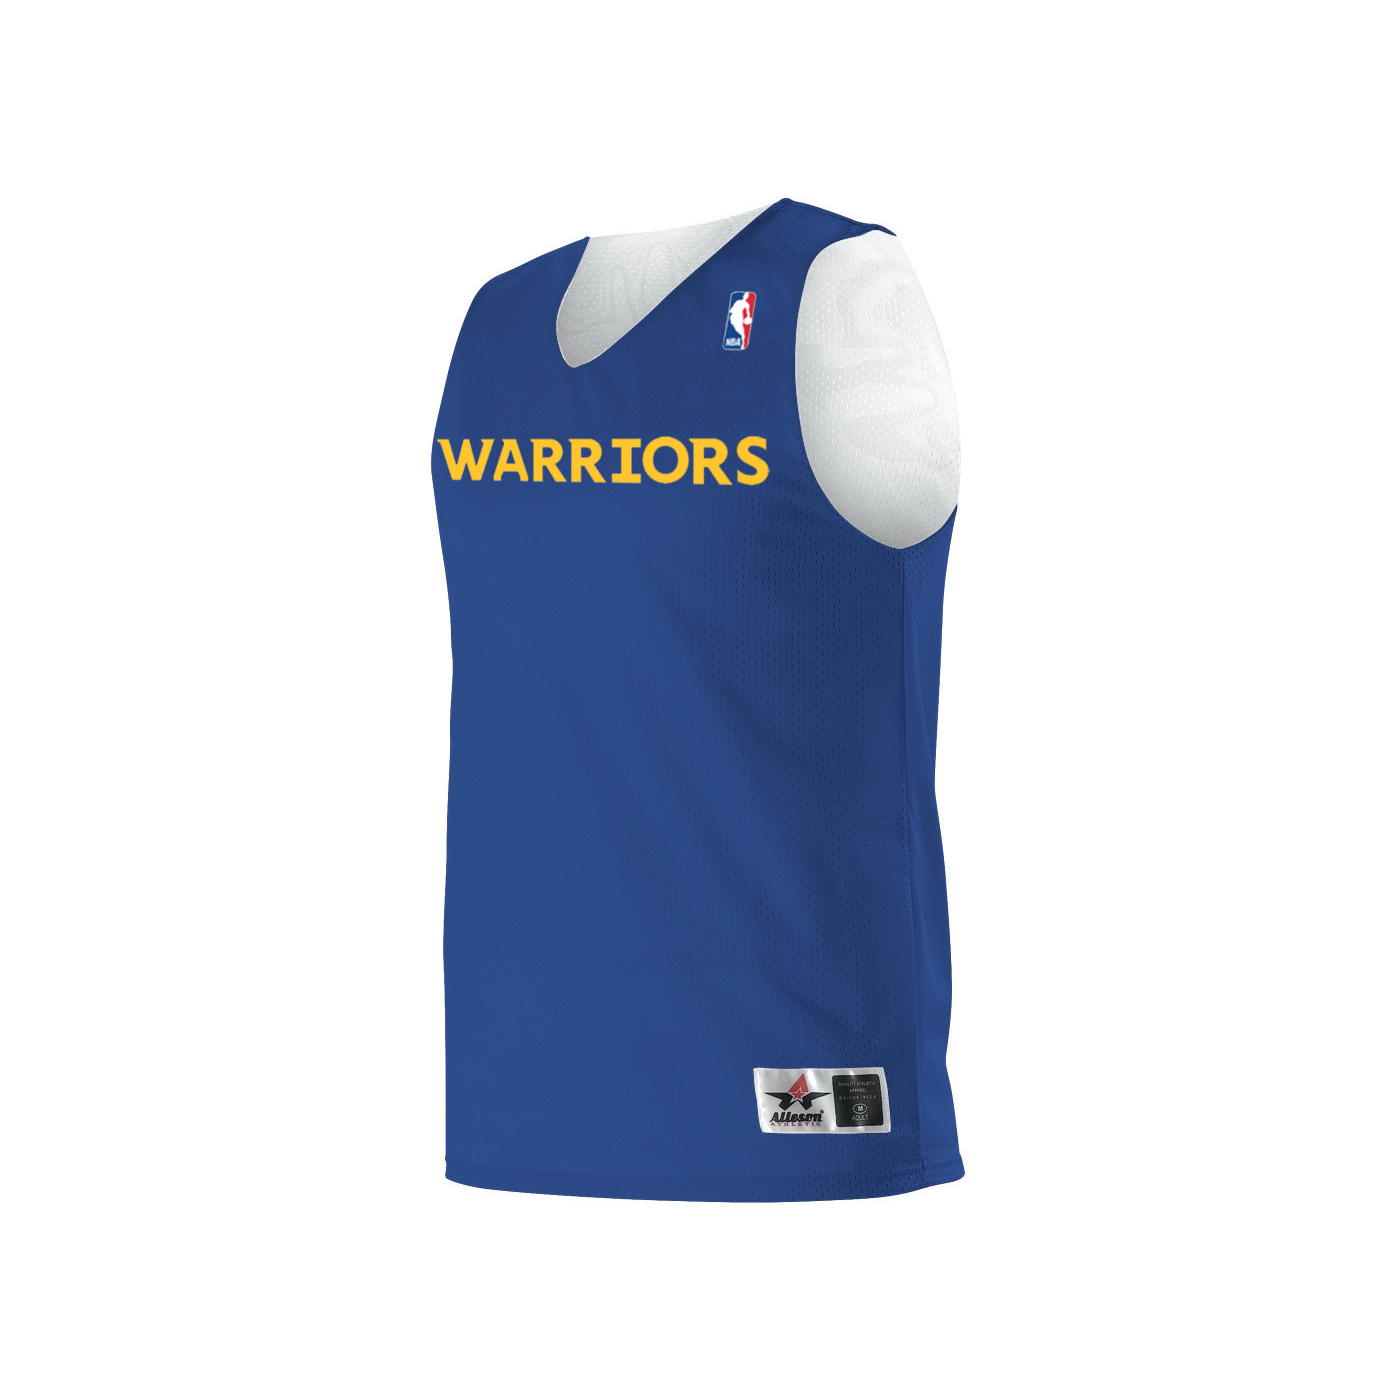 Youth Golden State Warriors Player Reversible Jersey